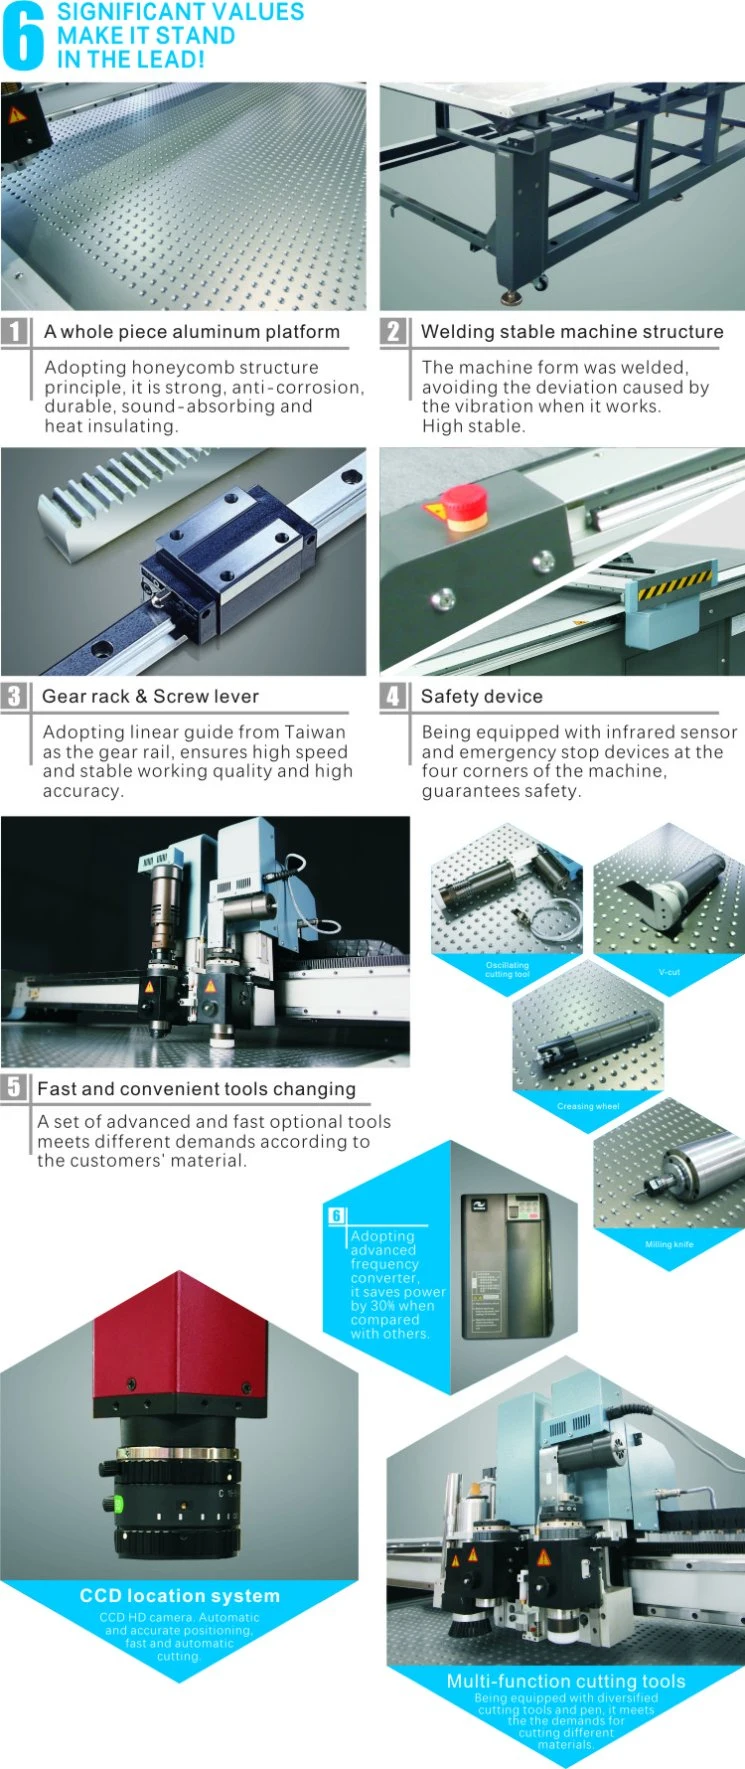 Automatic High Speed Rotary Knife CNC Cutting Machine for Shirts and Suits